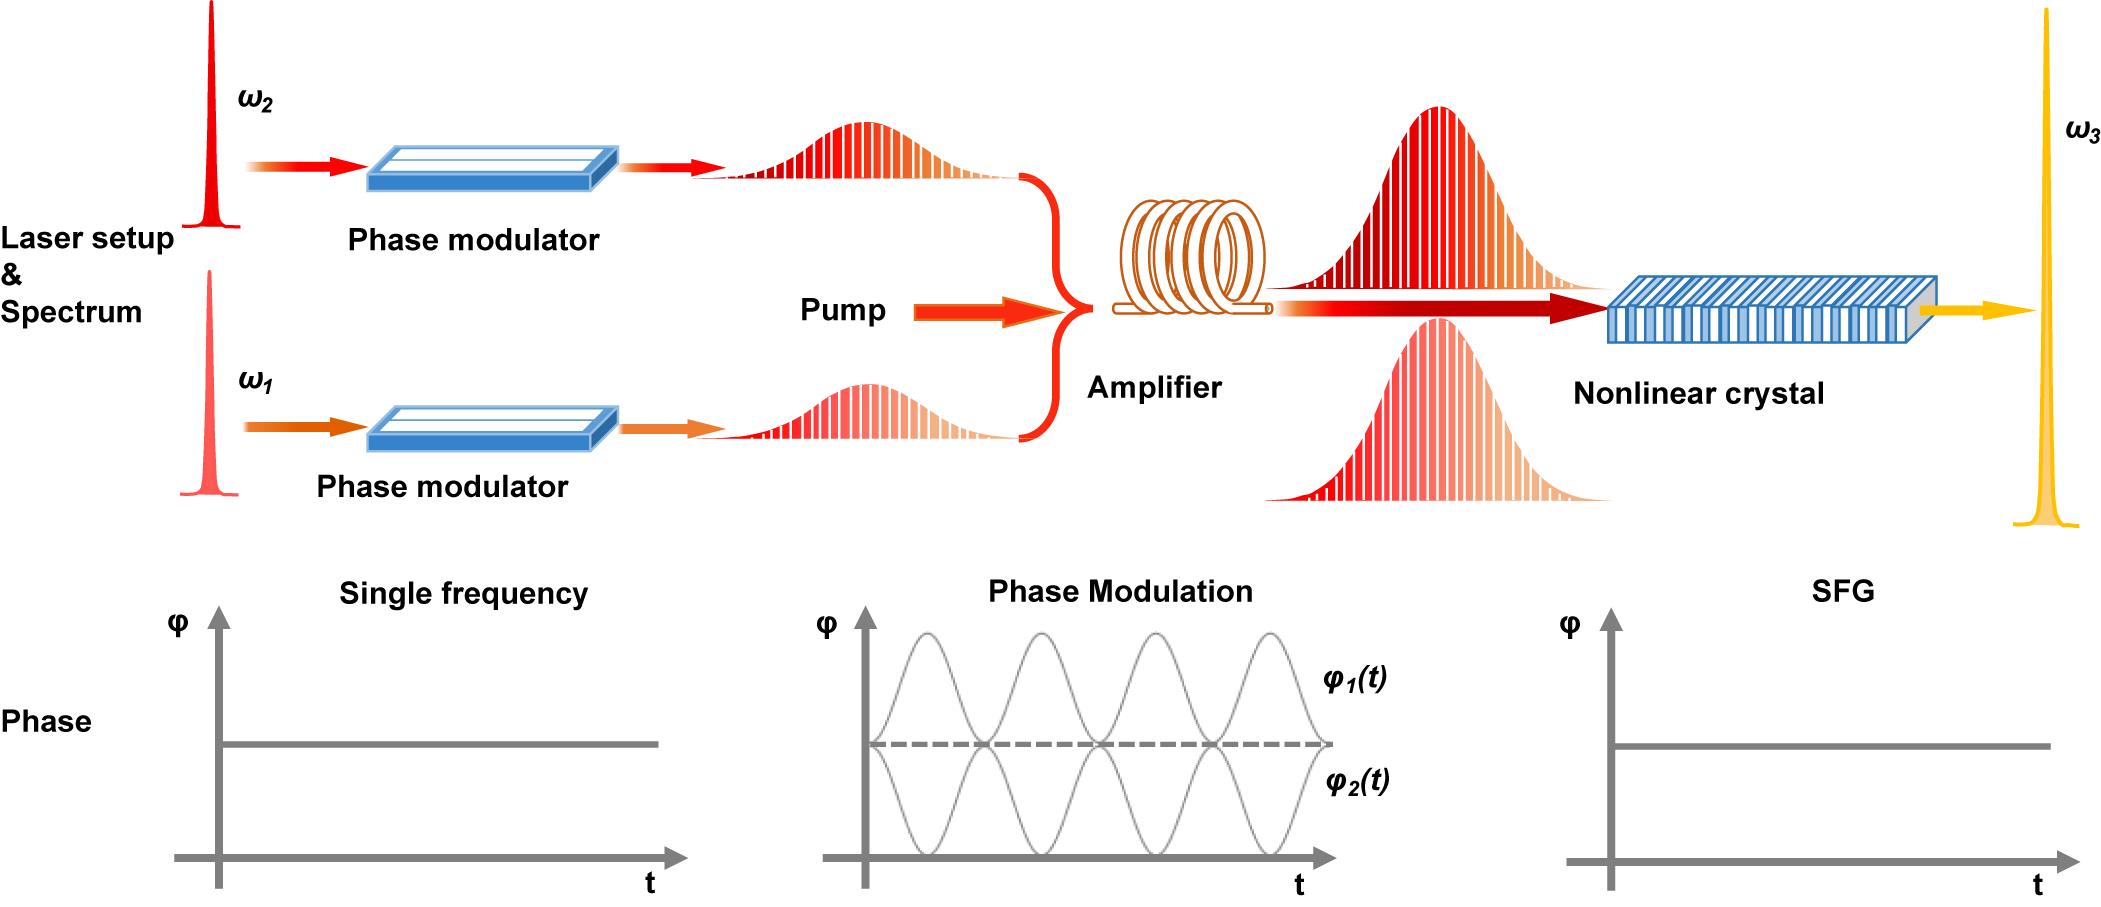 The concept of phase summation in SFG for single-frequency upconverted laser generation. The spectral and phase evolutions at different stages of the laser are schematically illustrated.